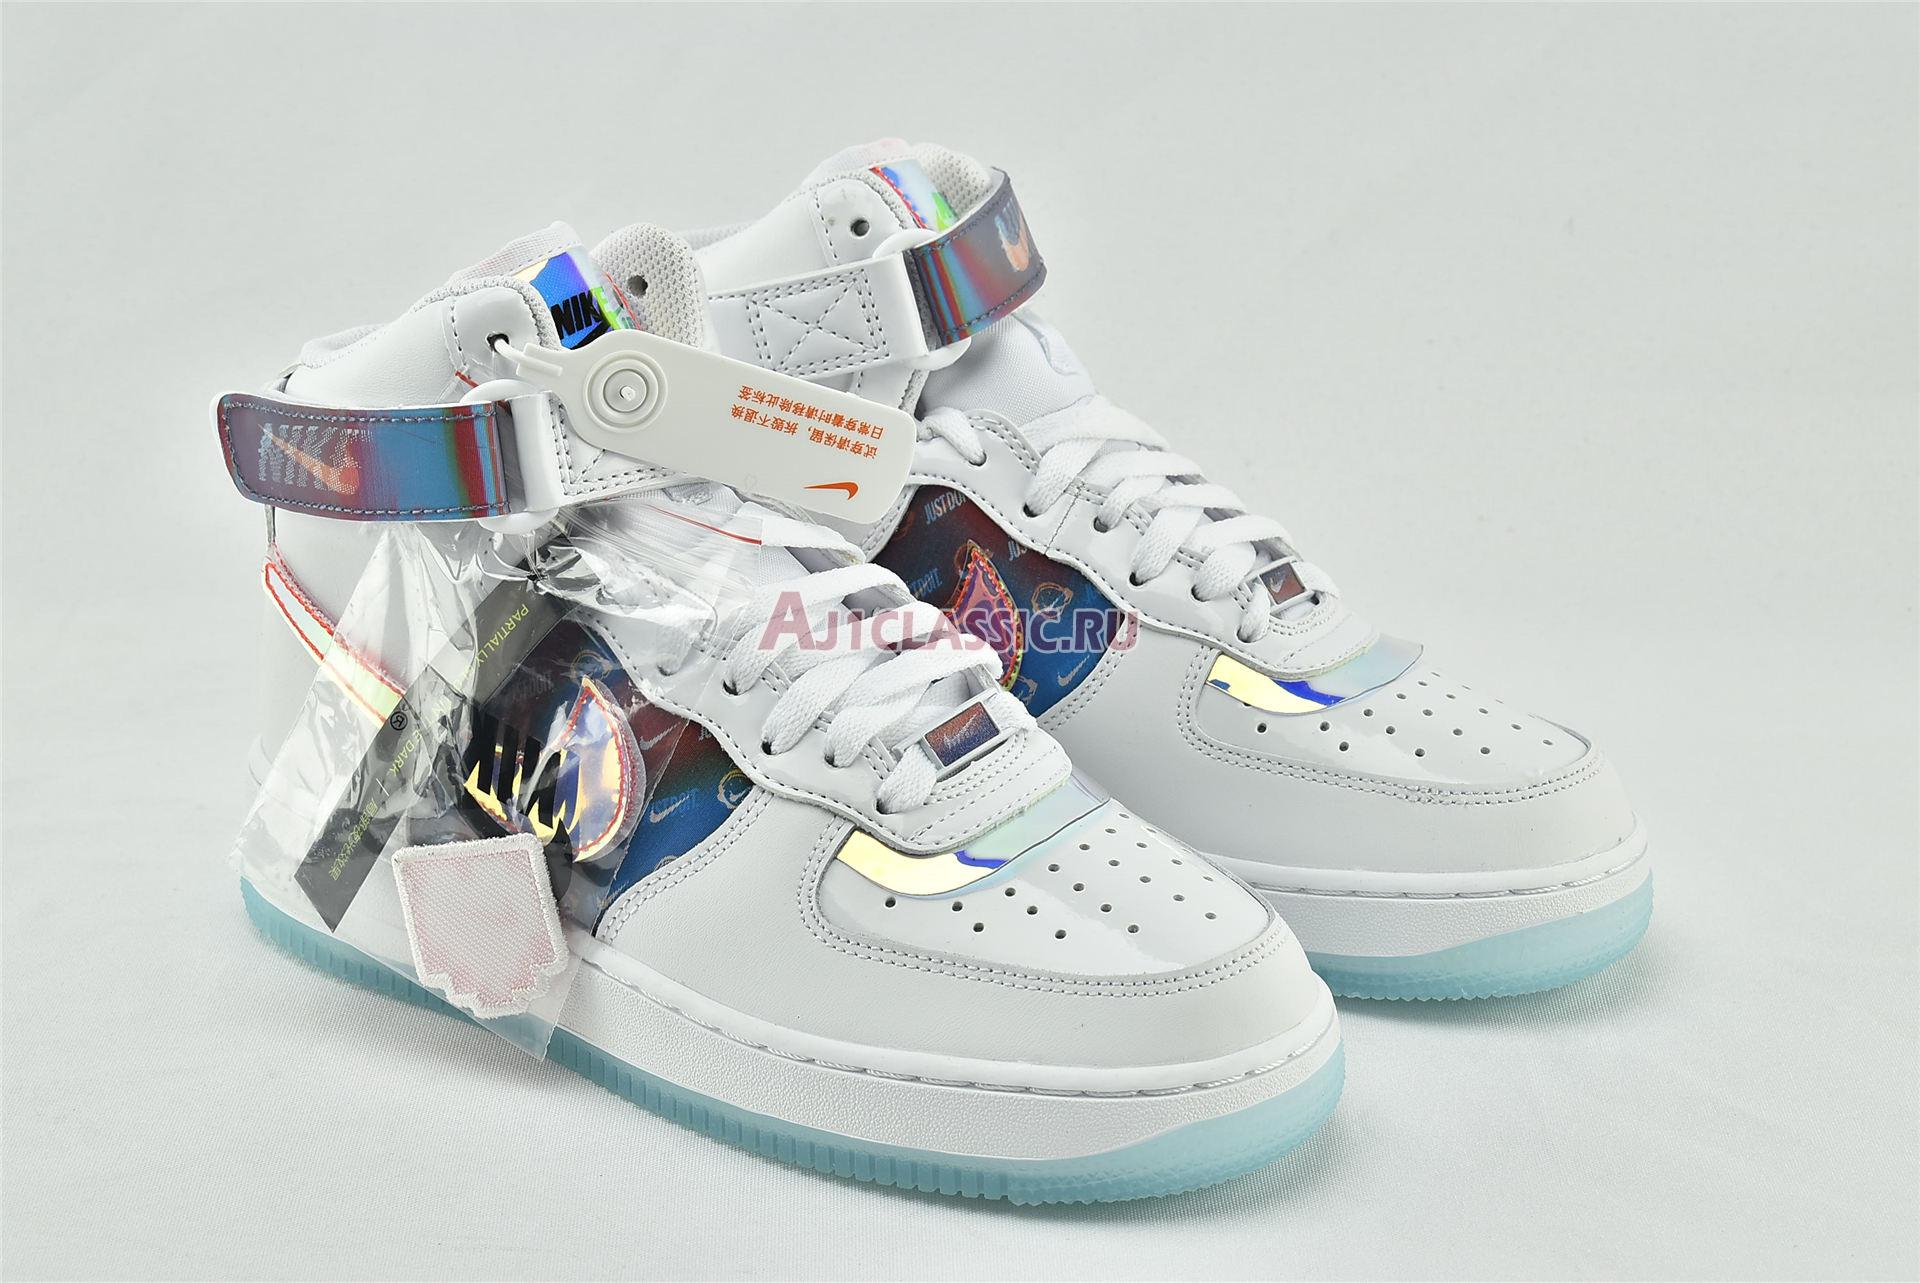 Nike Wmns Air Force 1 High LX "Have A Good Game" DC2111-191